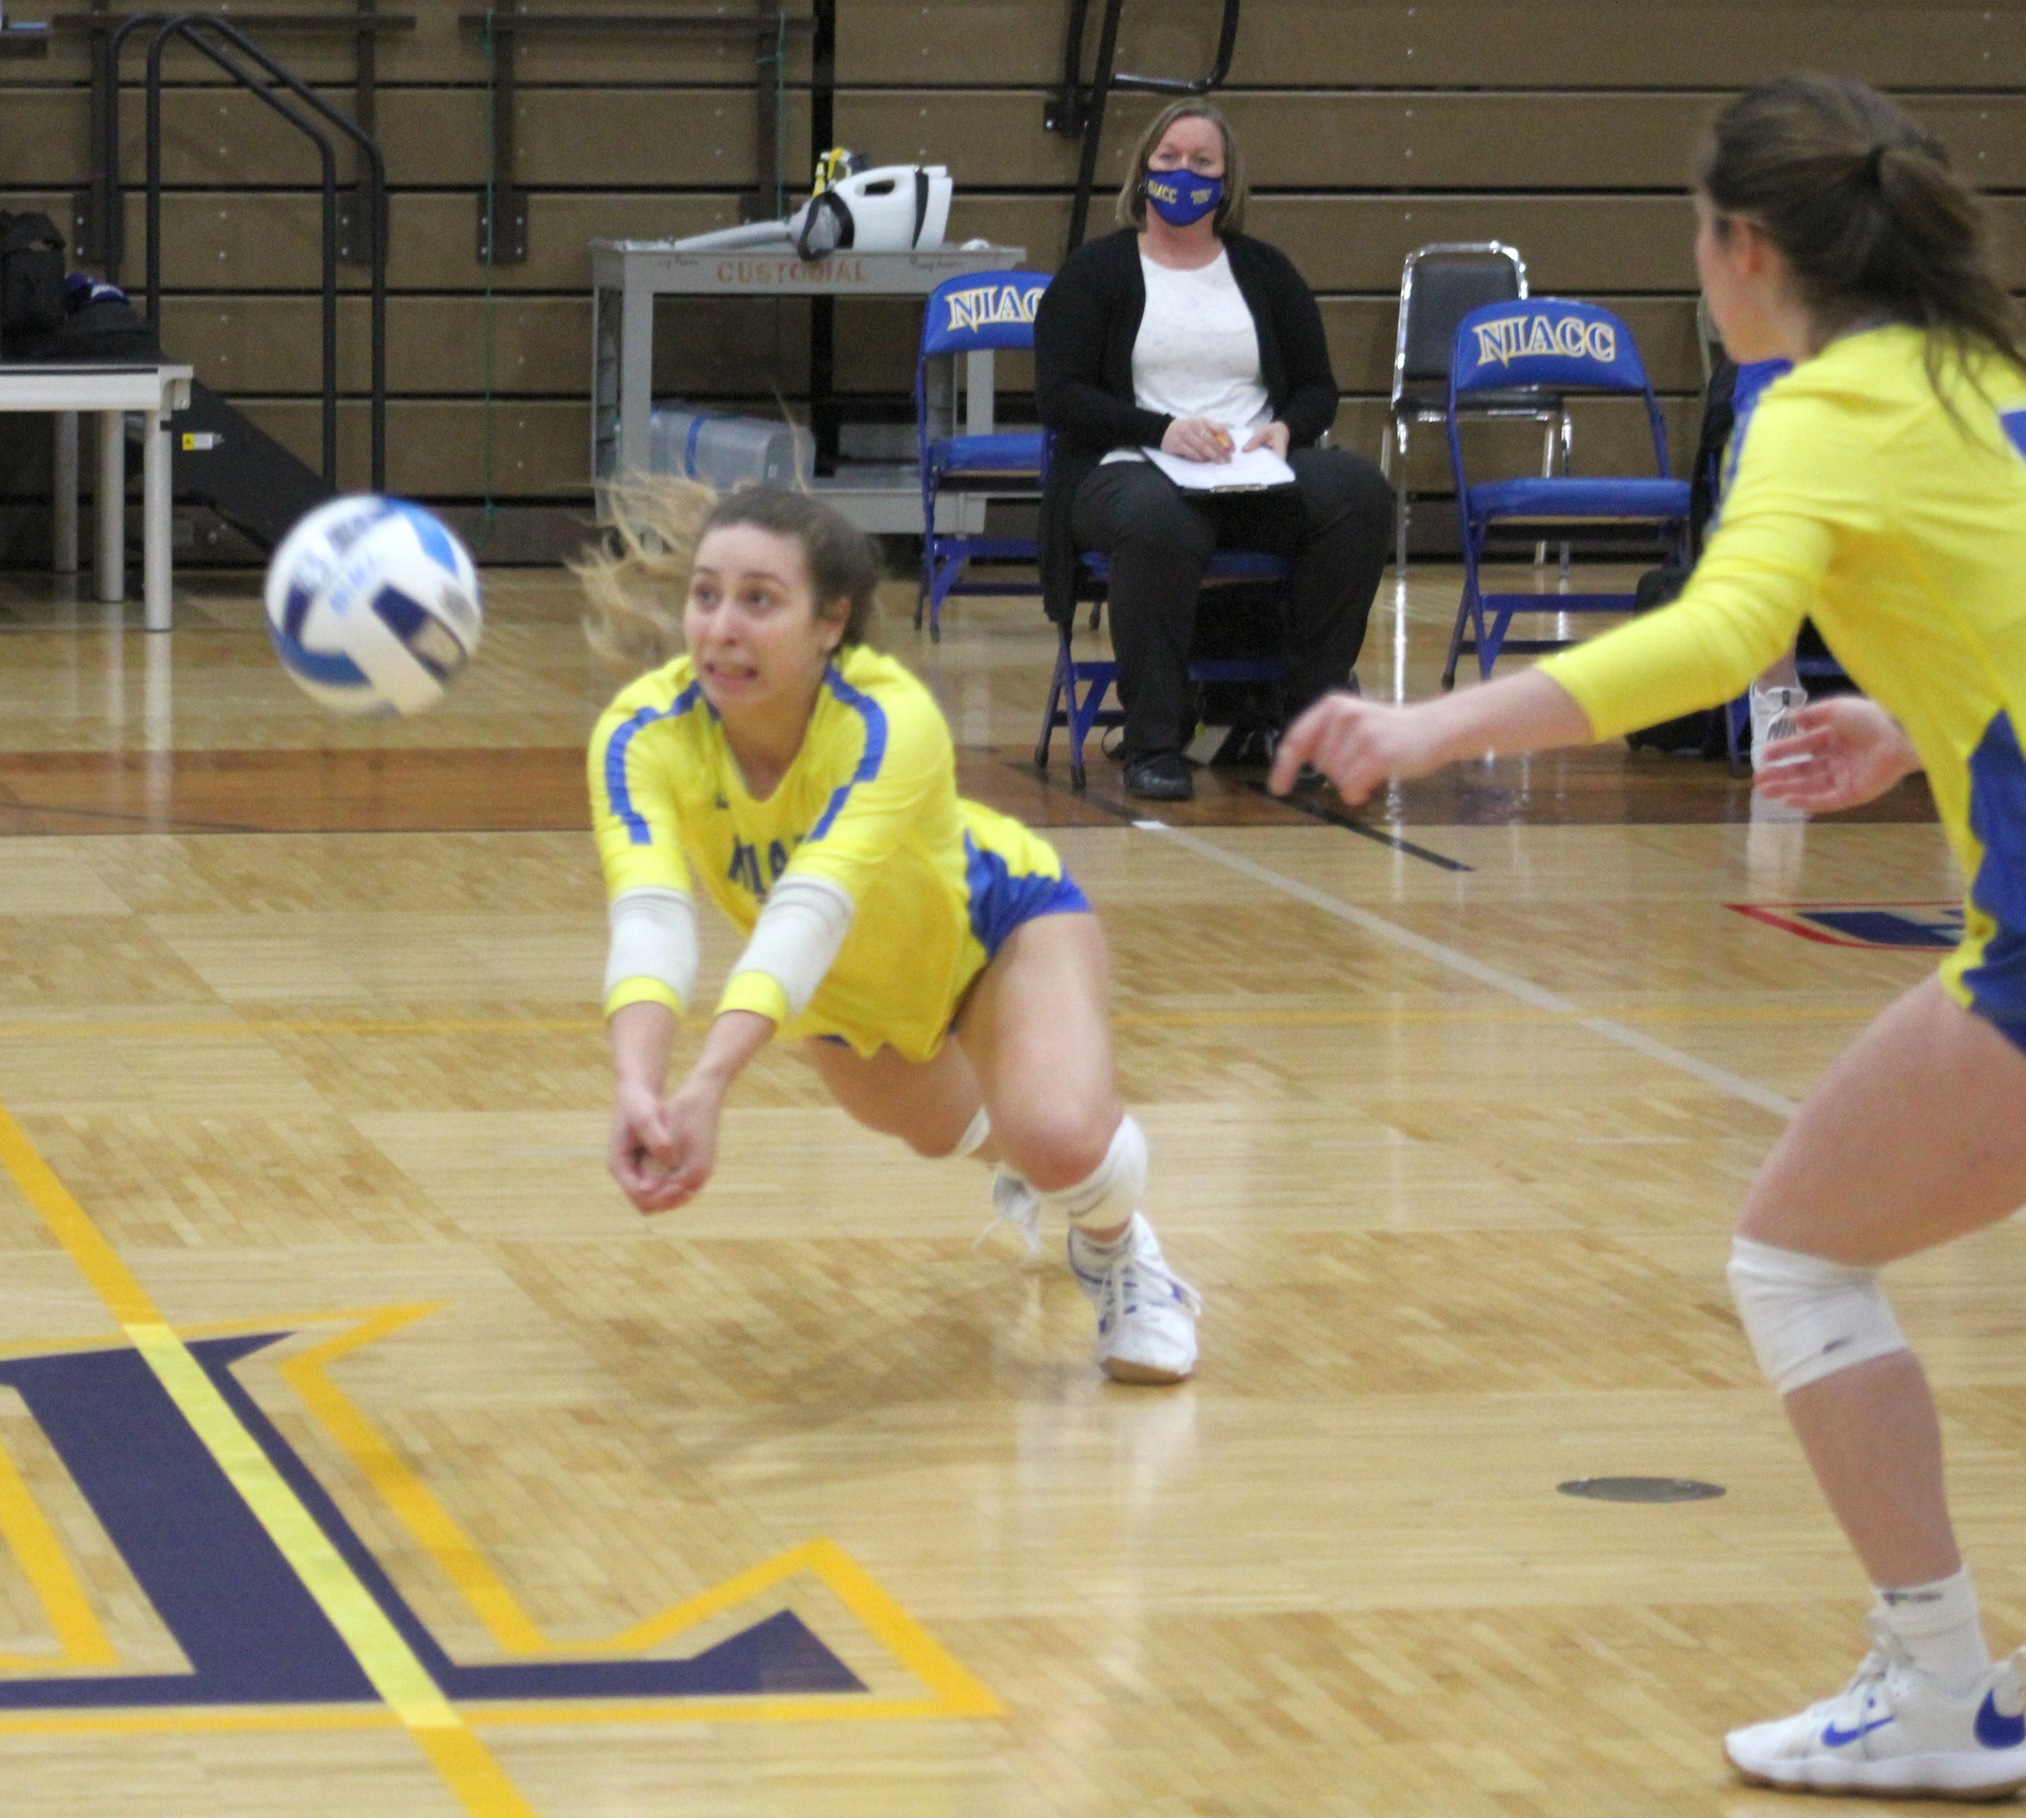 NIACC's Becca Steffen dives for the ball during Tuesday's match against DMACC.